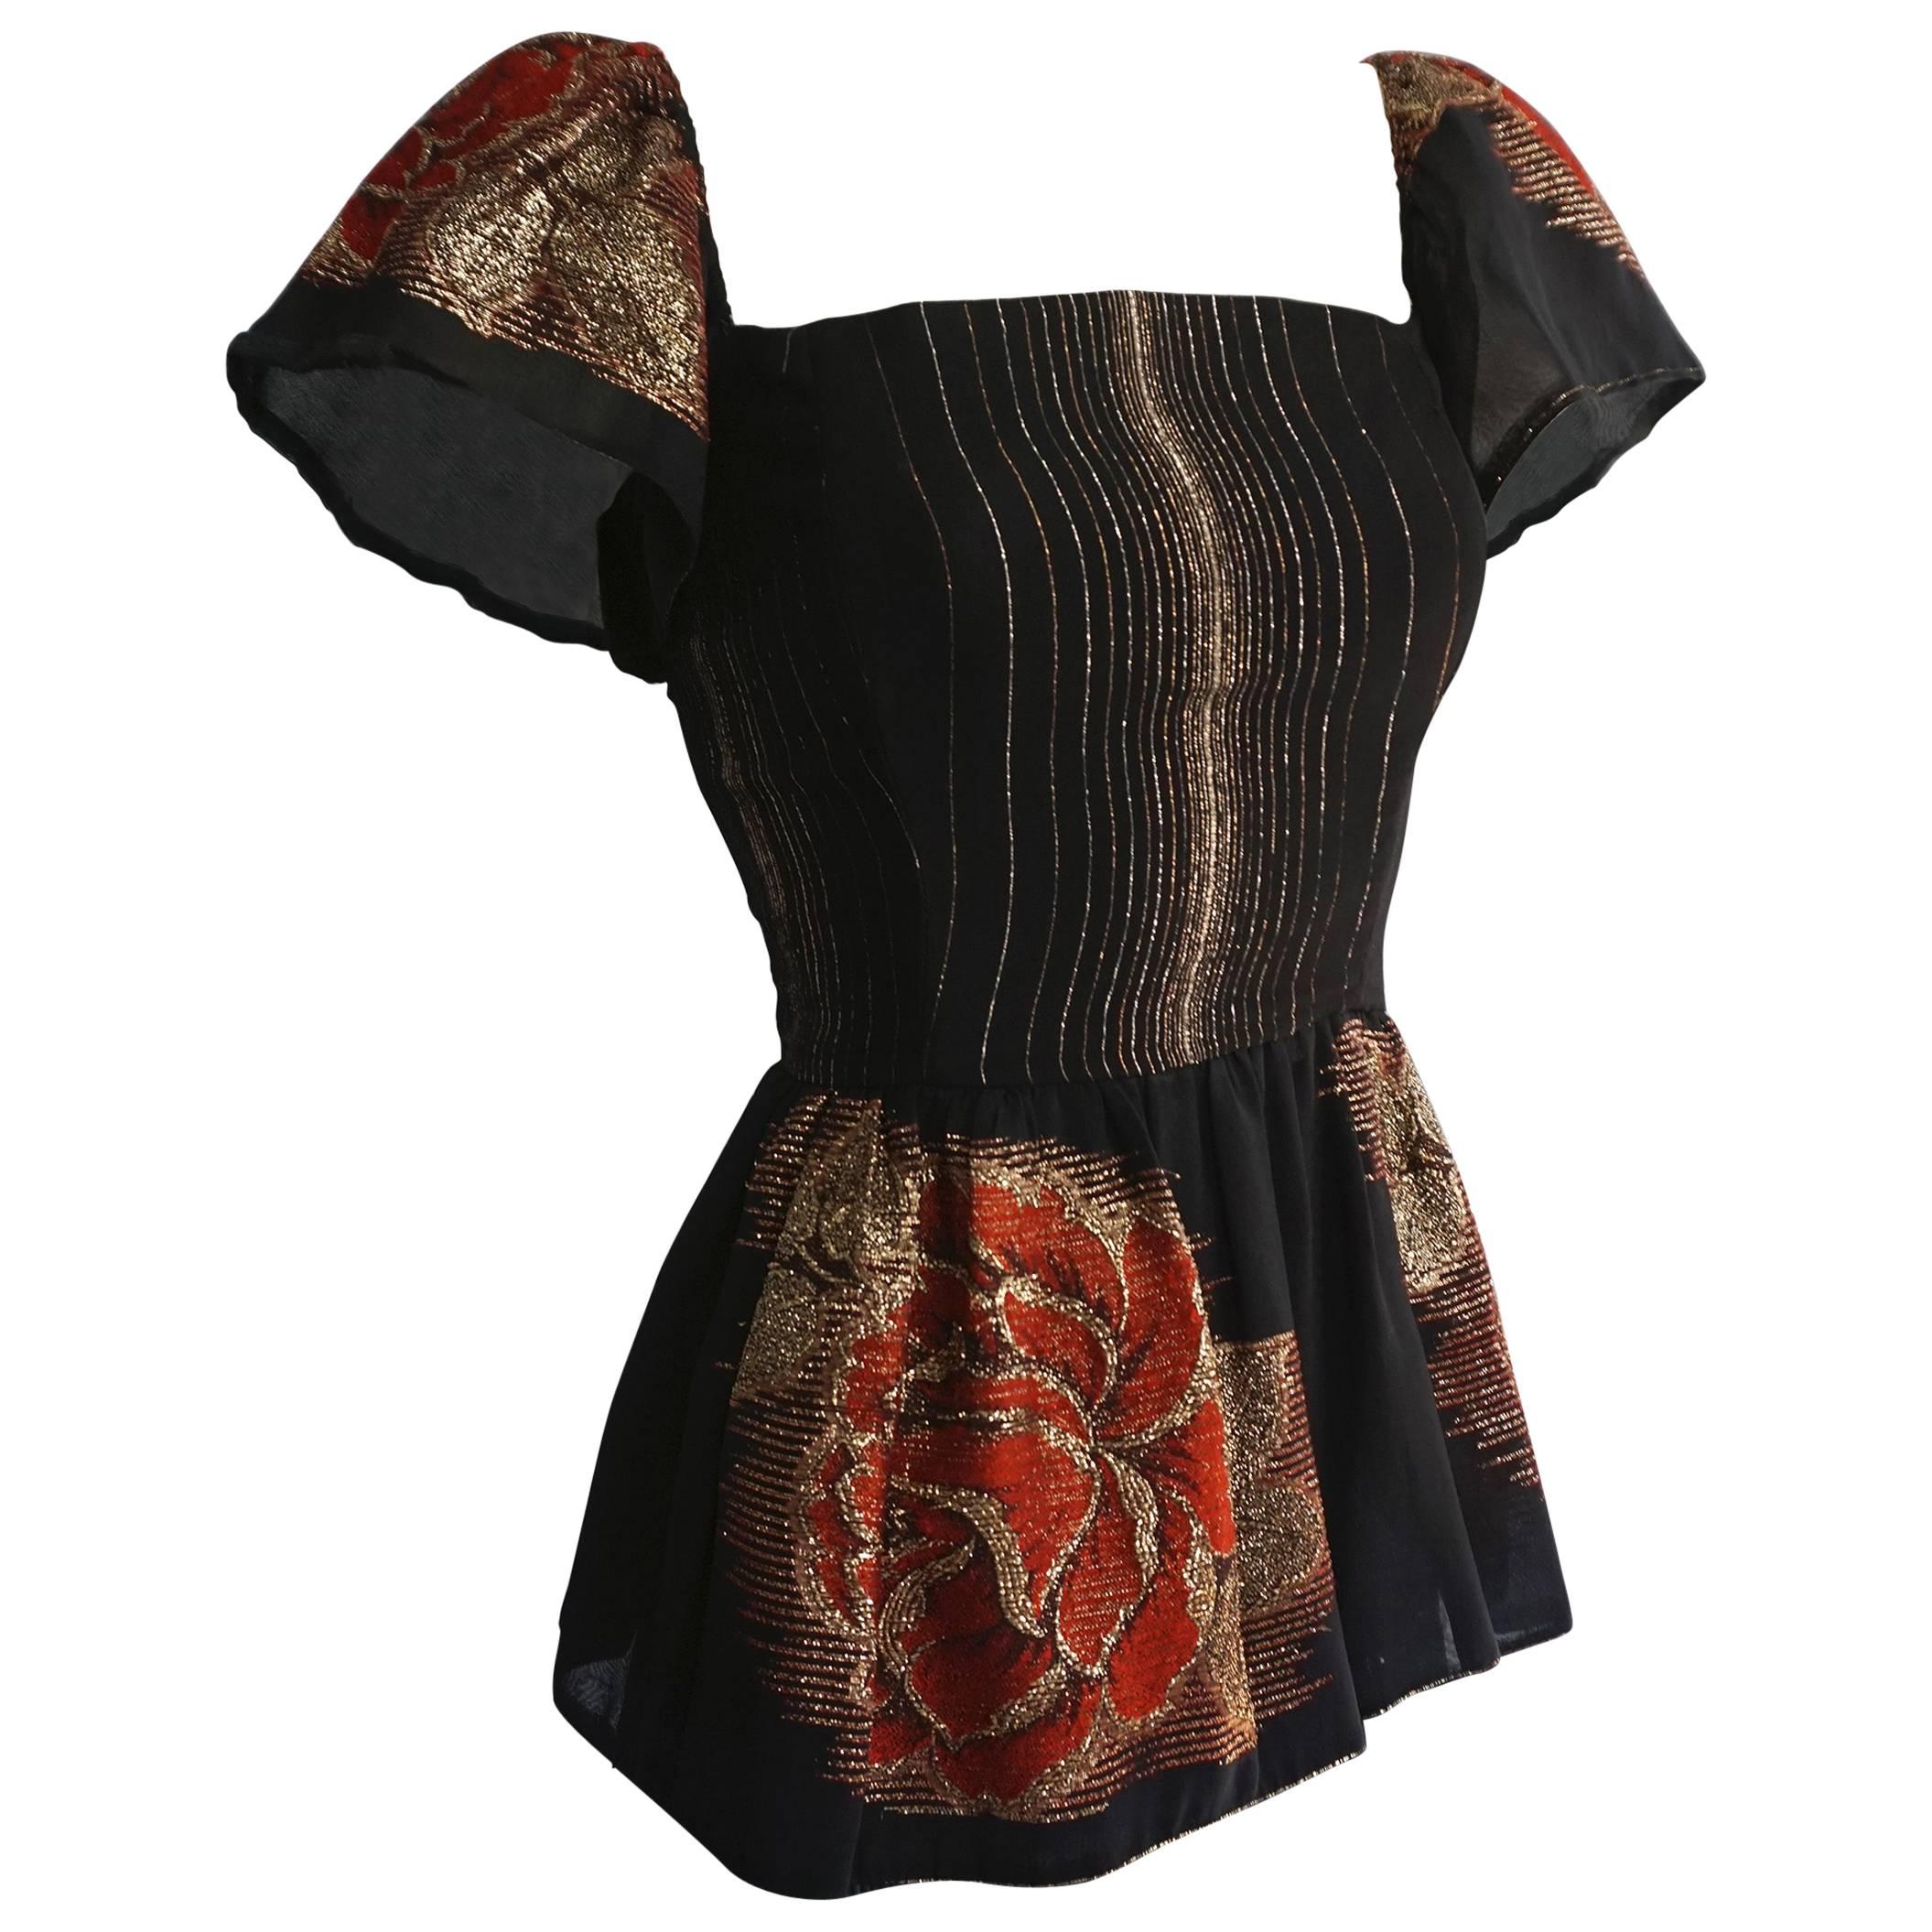 VICTOR COSTA Rose Print Lame Corset Top with Peplum & Sleeve Detail For Sale